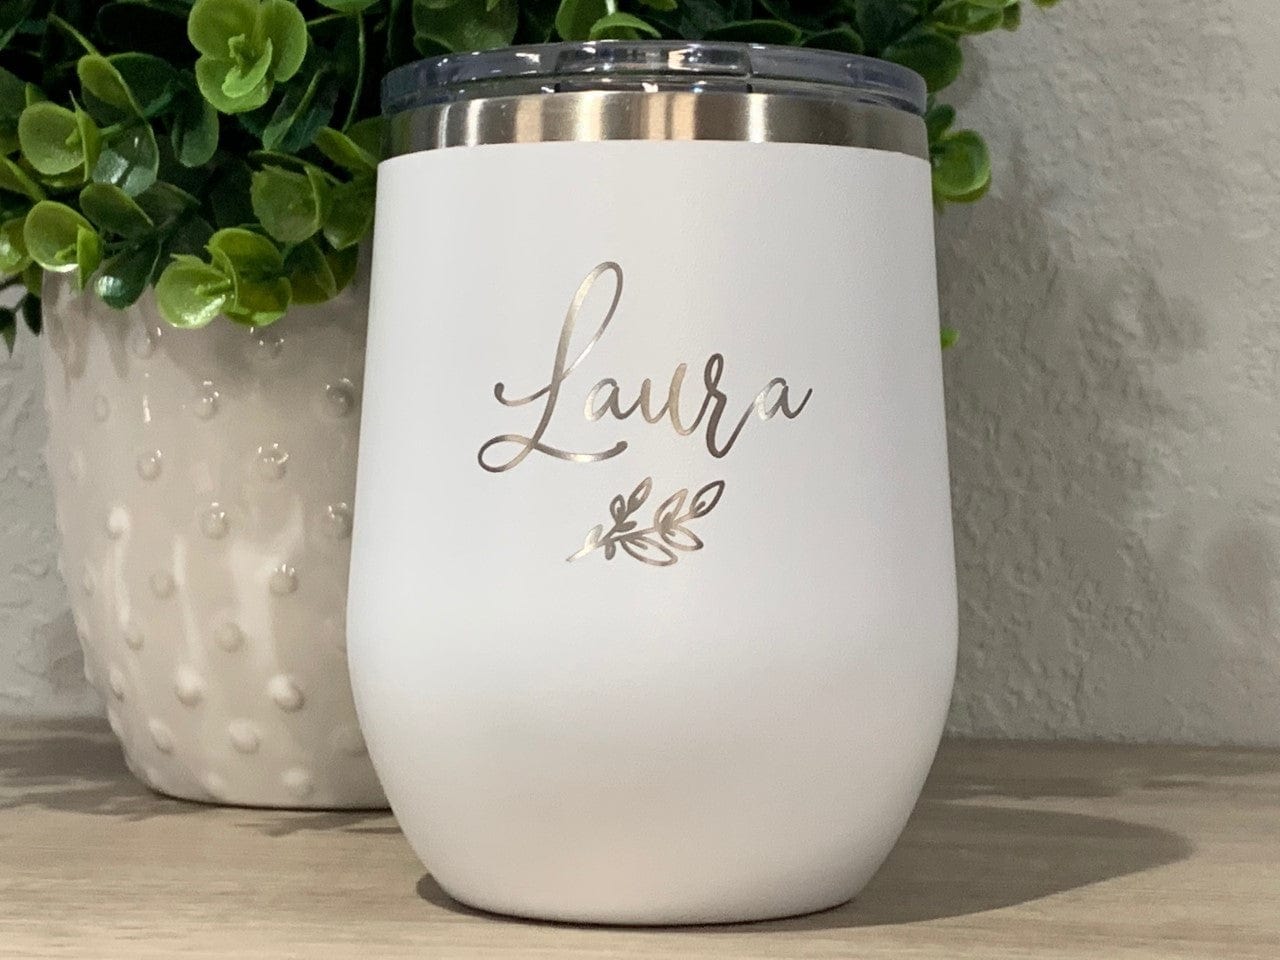 https://cdn.shopify.com/s/files/1/0777/8633/products/12oz-tumbler-wine-tumbler-name-personalized-12oz-wine-tumbler-with-lid-engraved-with-name-and-leaf-34540248694951.jpg?v=1681054208